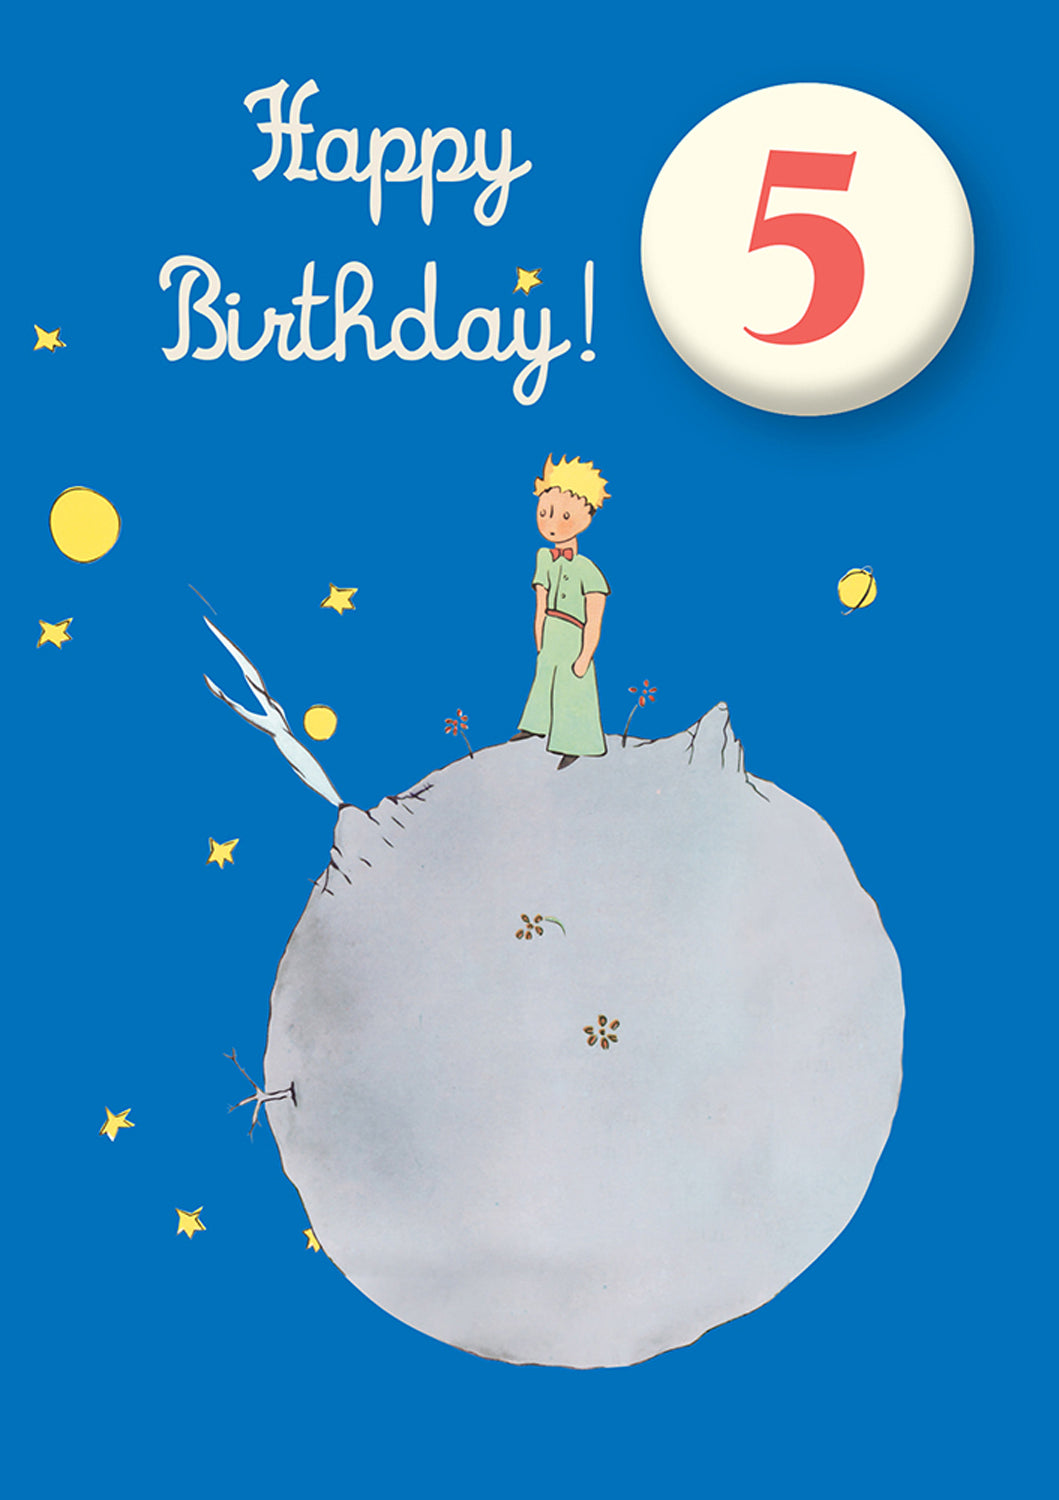 Greeting Card: The Little Prince - Happy Birthday Age 5 Badge